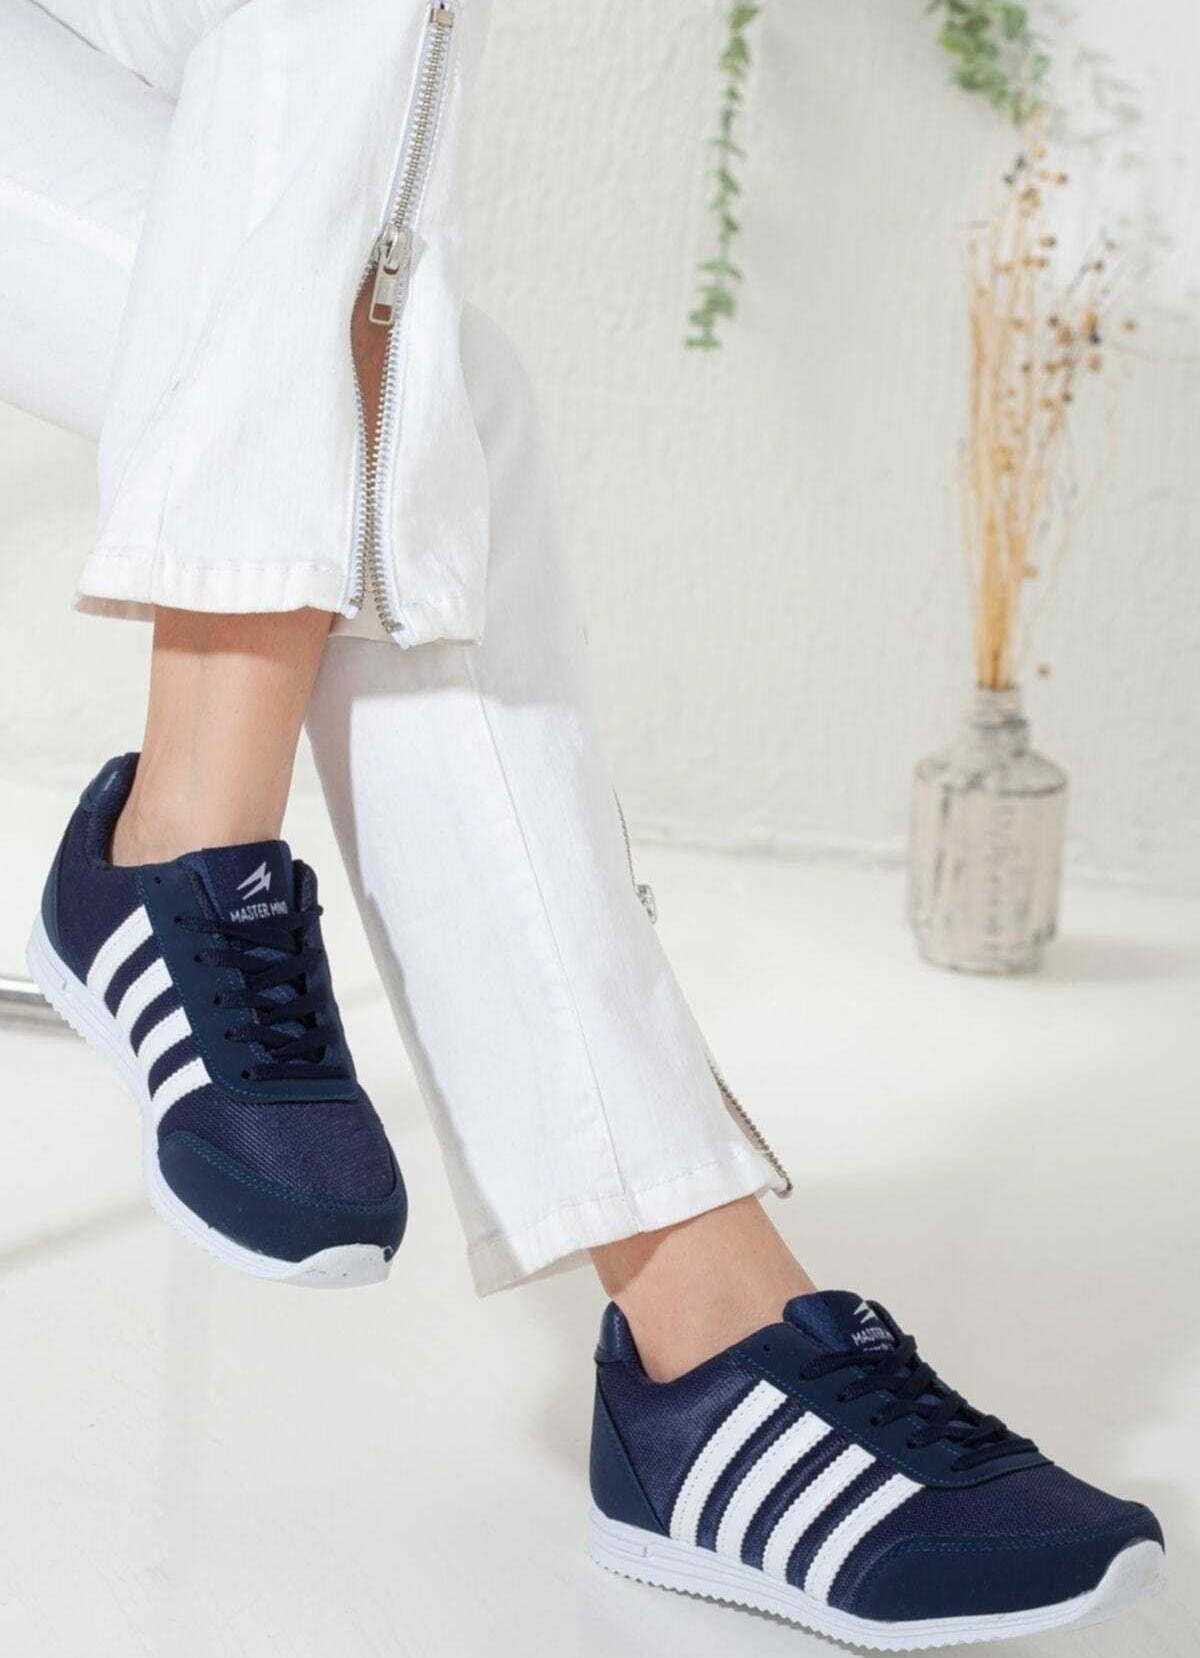 Buying and price of women's oxford lace up shoes 